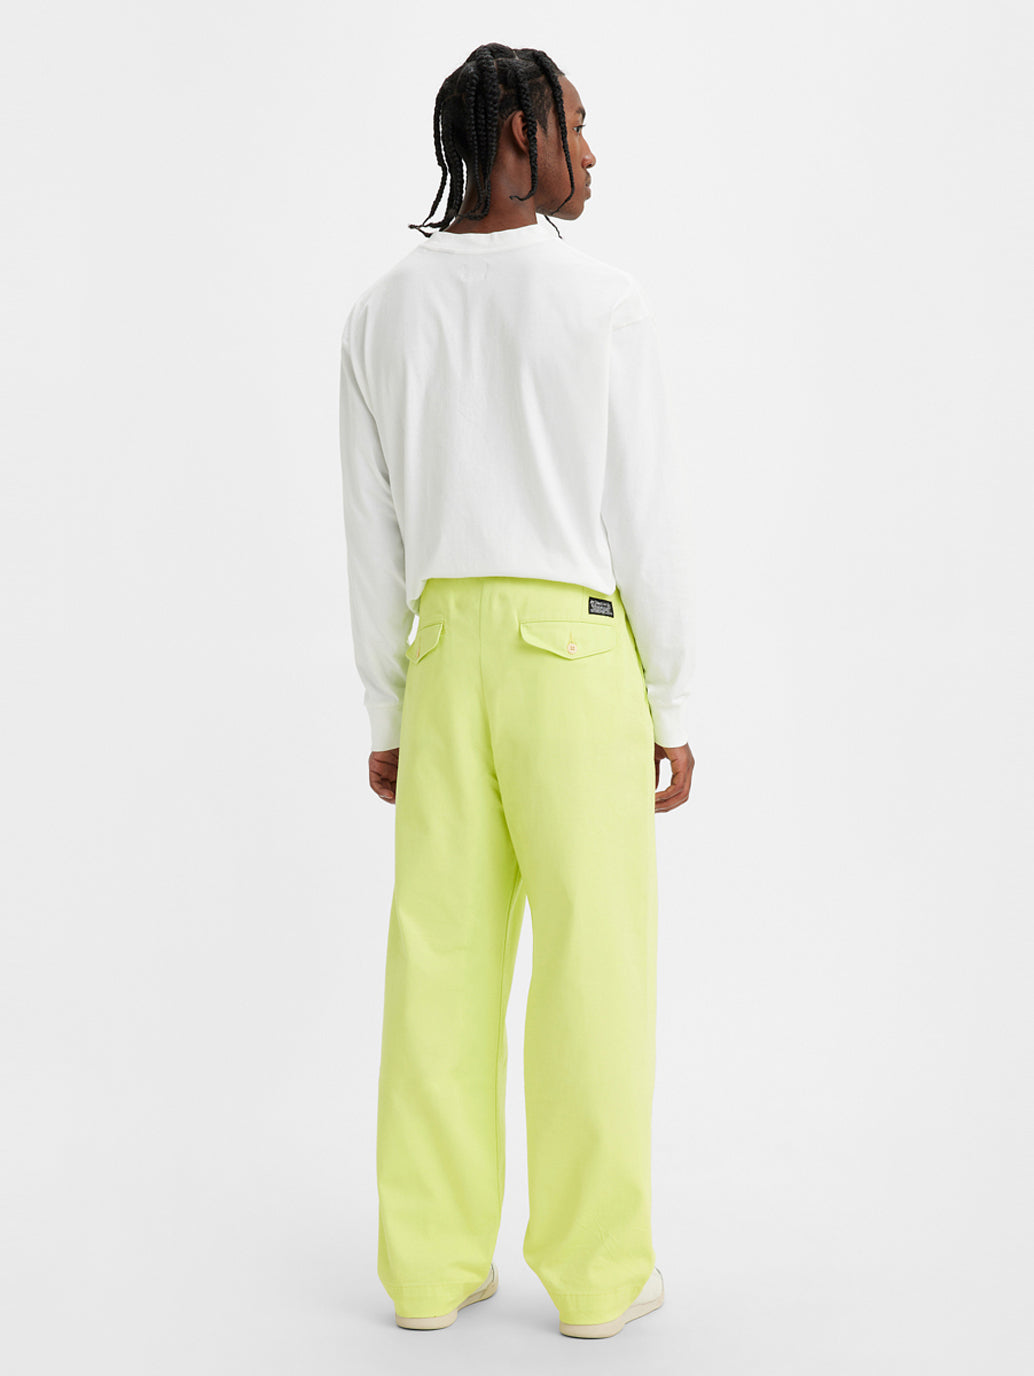 Men's Yellow Loose Fit Trousers